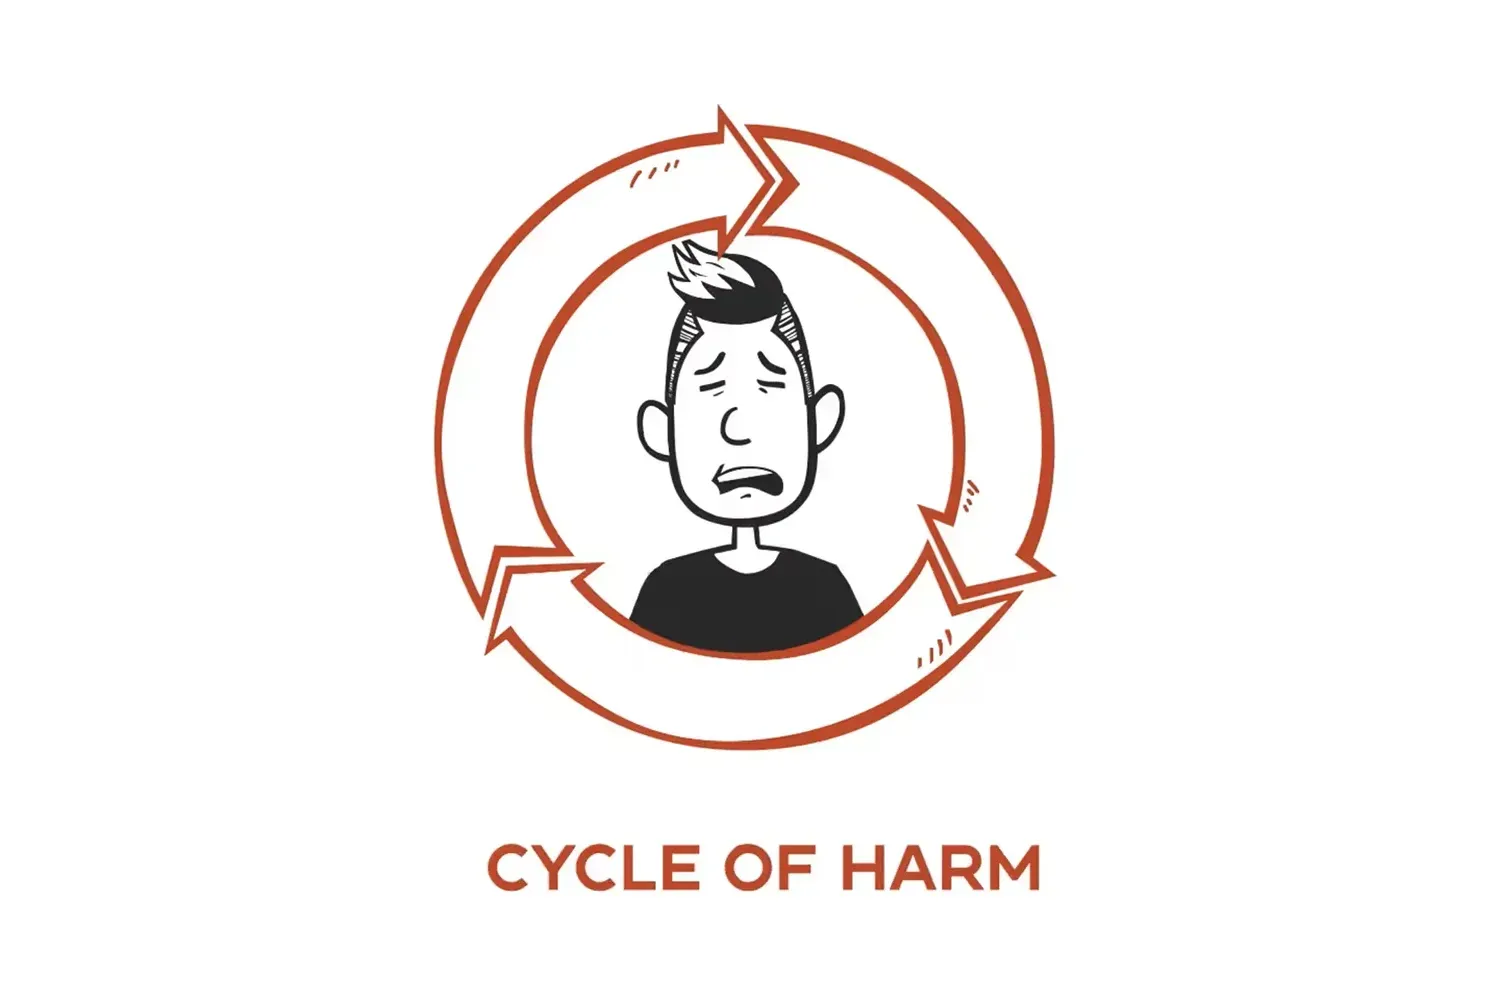 The Cycle of Harm